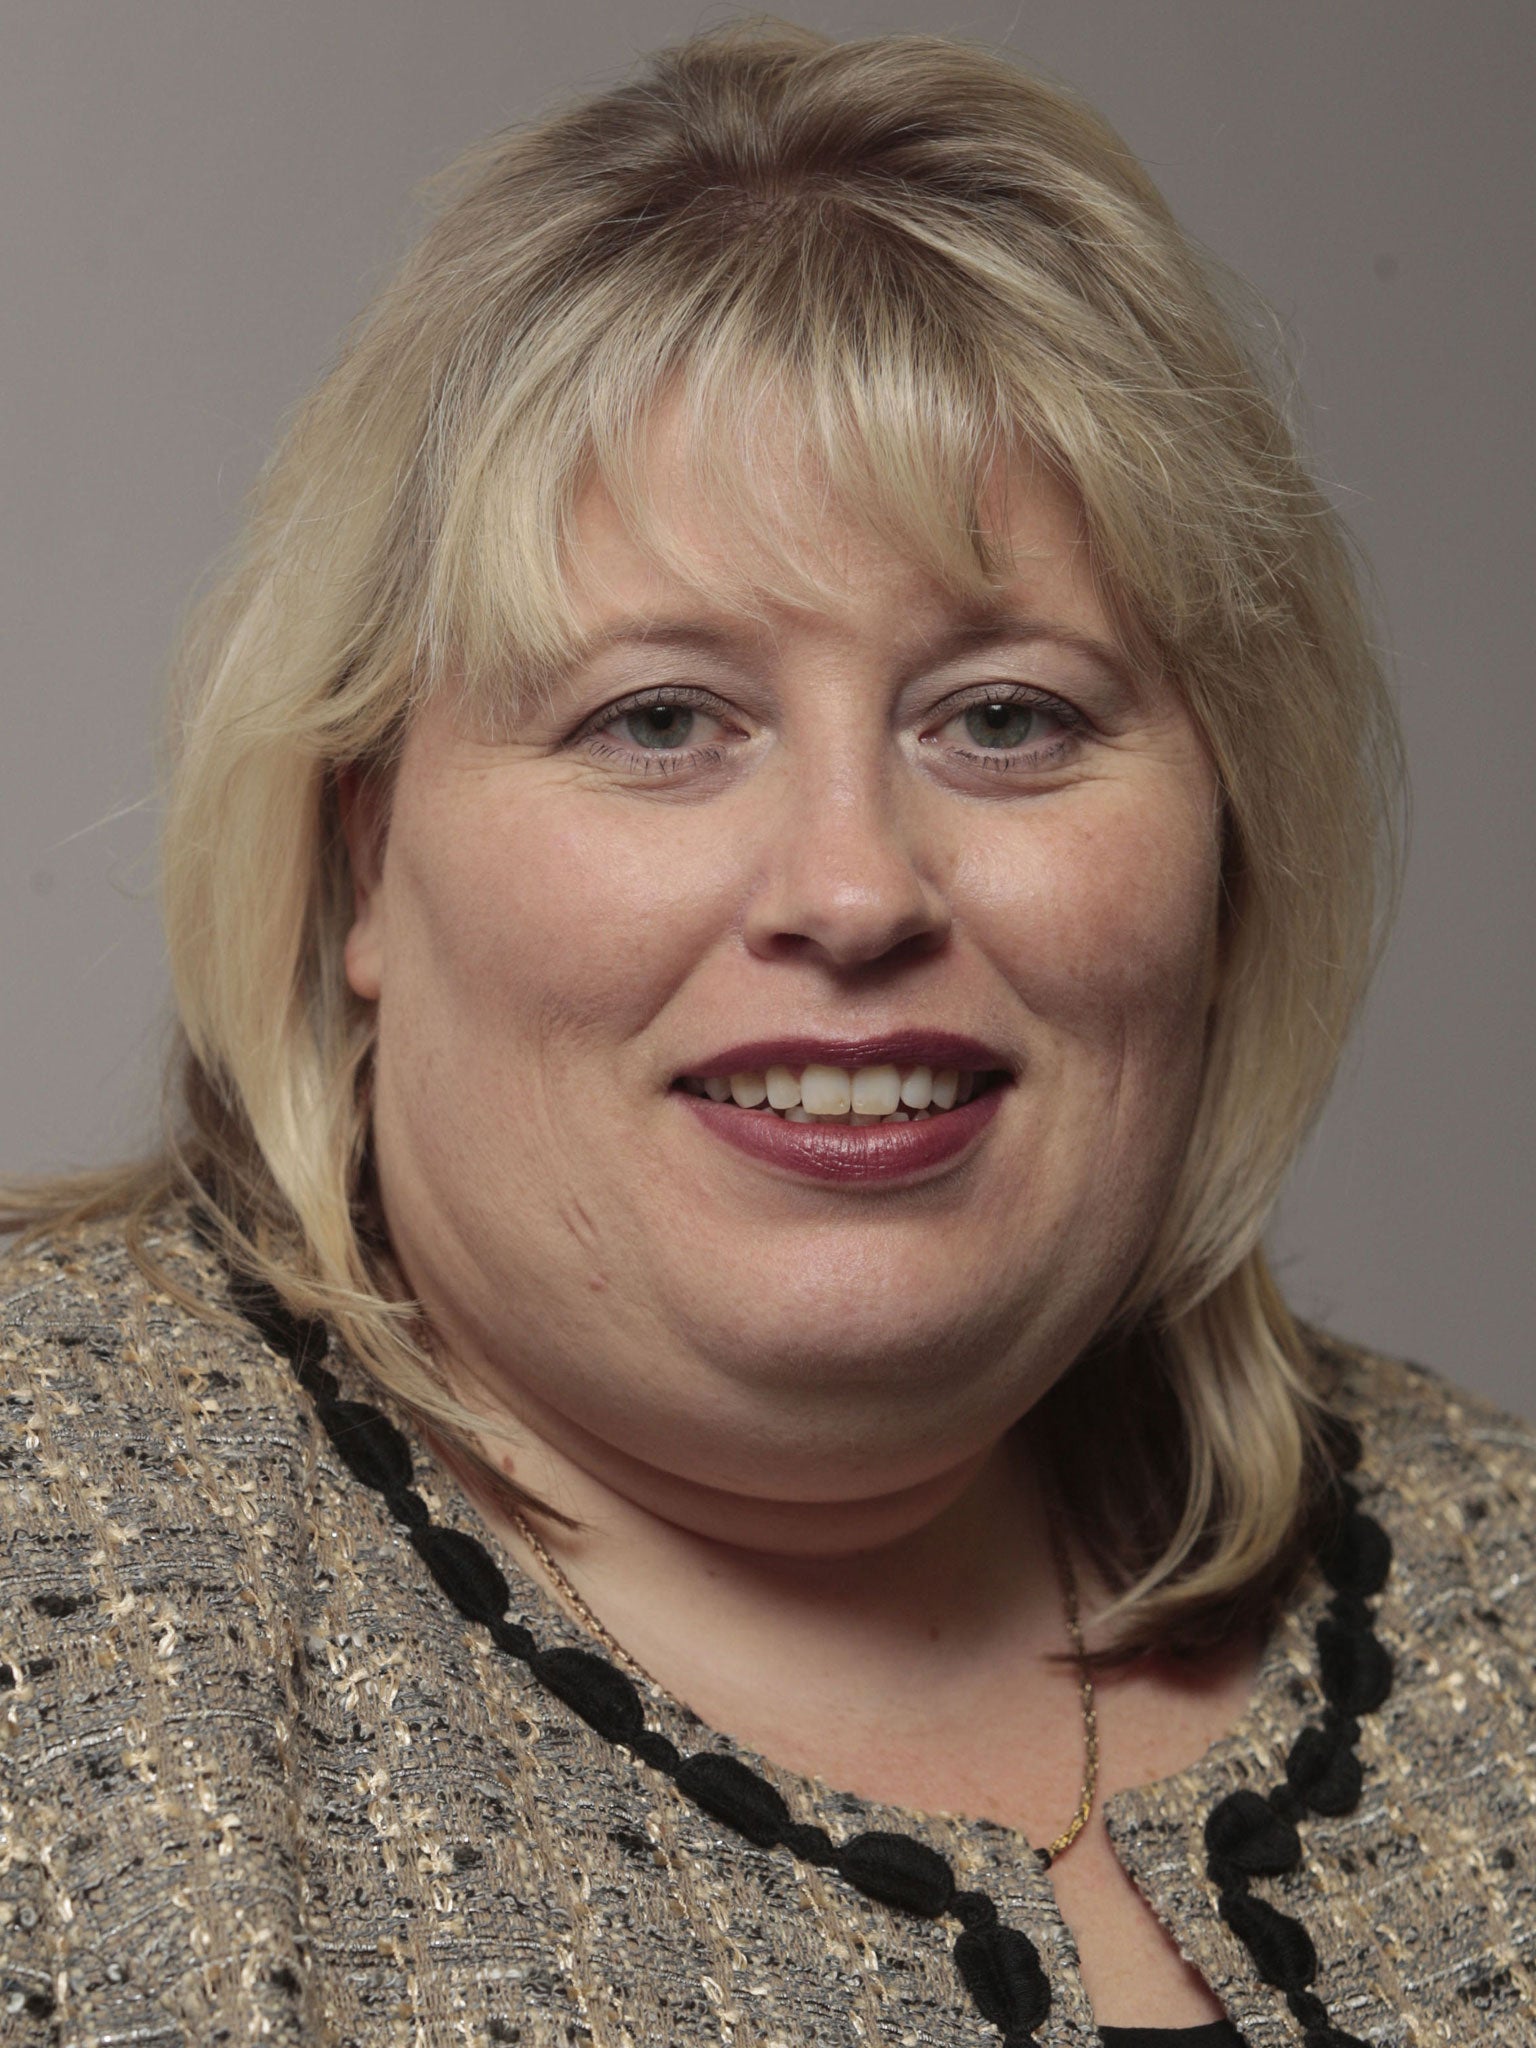 Karen Whitefield, a former Labour MSP, has been selected as the party’s 2015 general election candidate in Falkirk, the constituency at the centre of multiple controversies